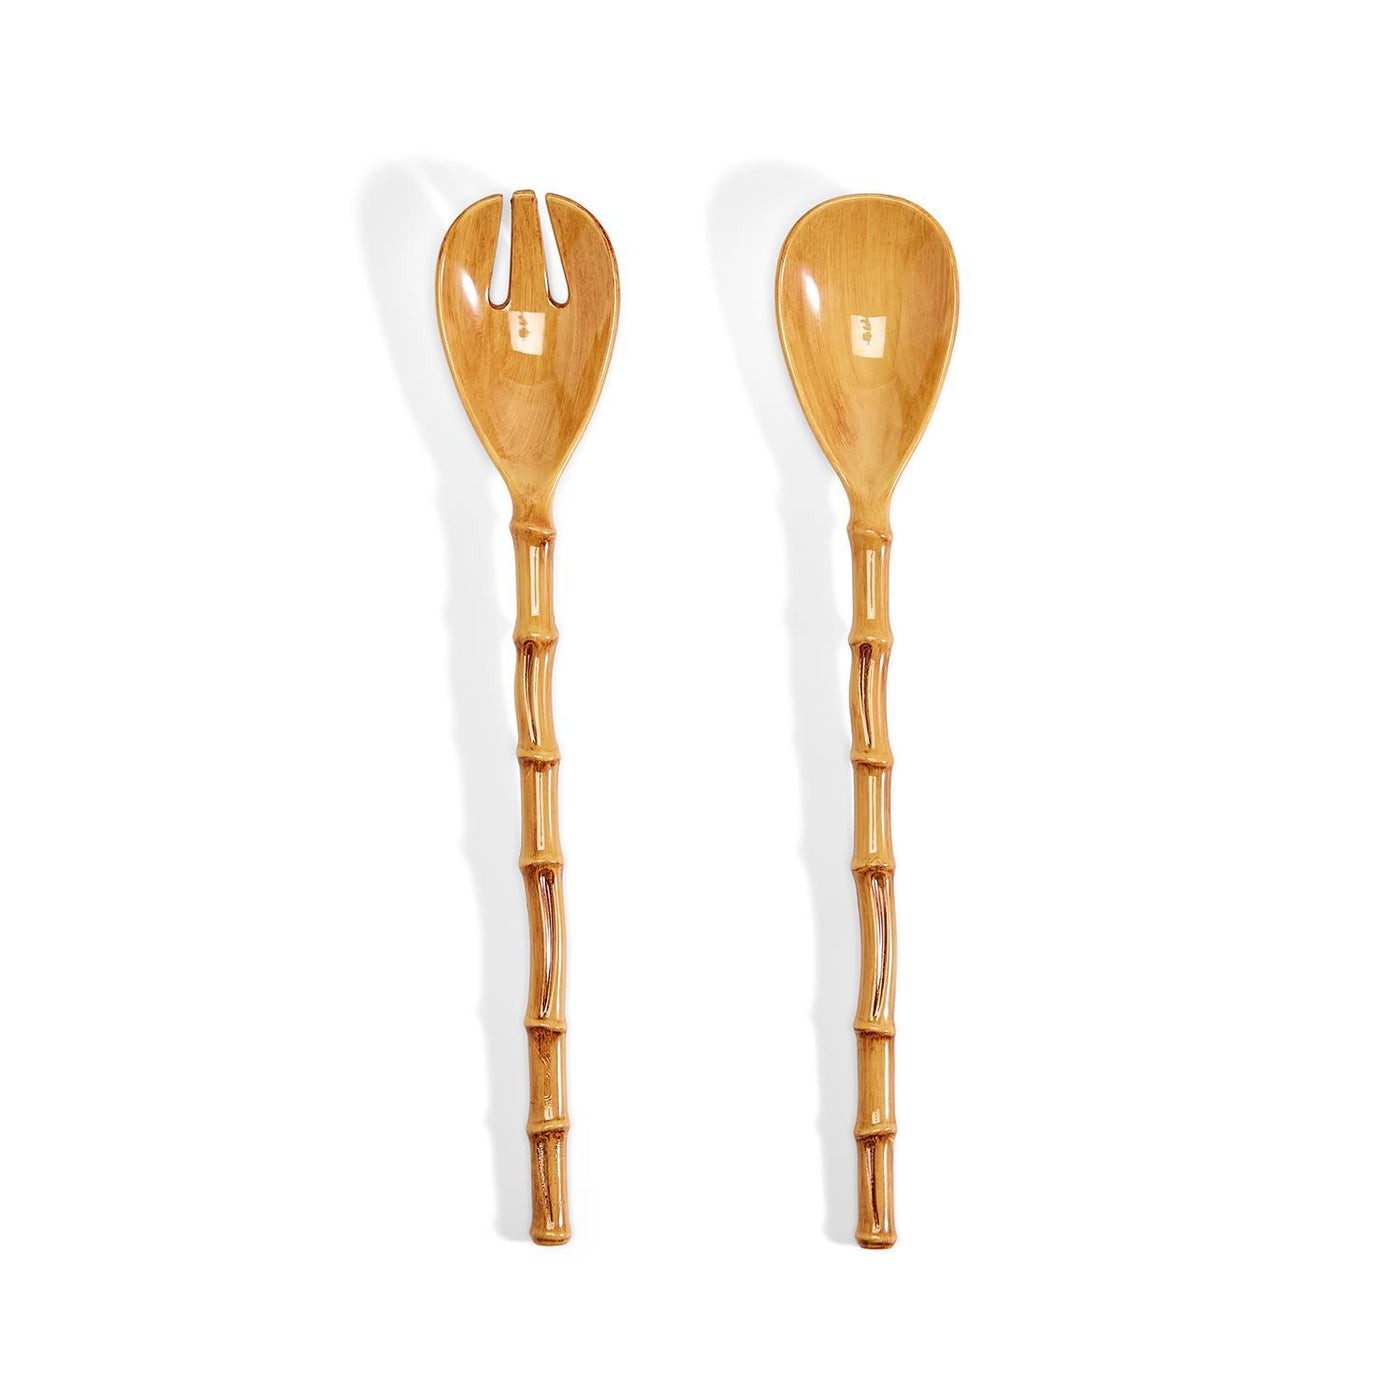 Set of 2 Bamboo Touch Accent Salad Servers-HOME/GIFTWARE-Kevin's Fine Outdoor Gear & Apparel